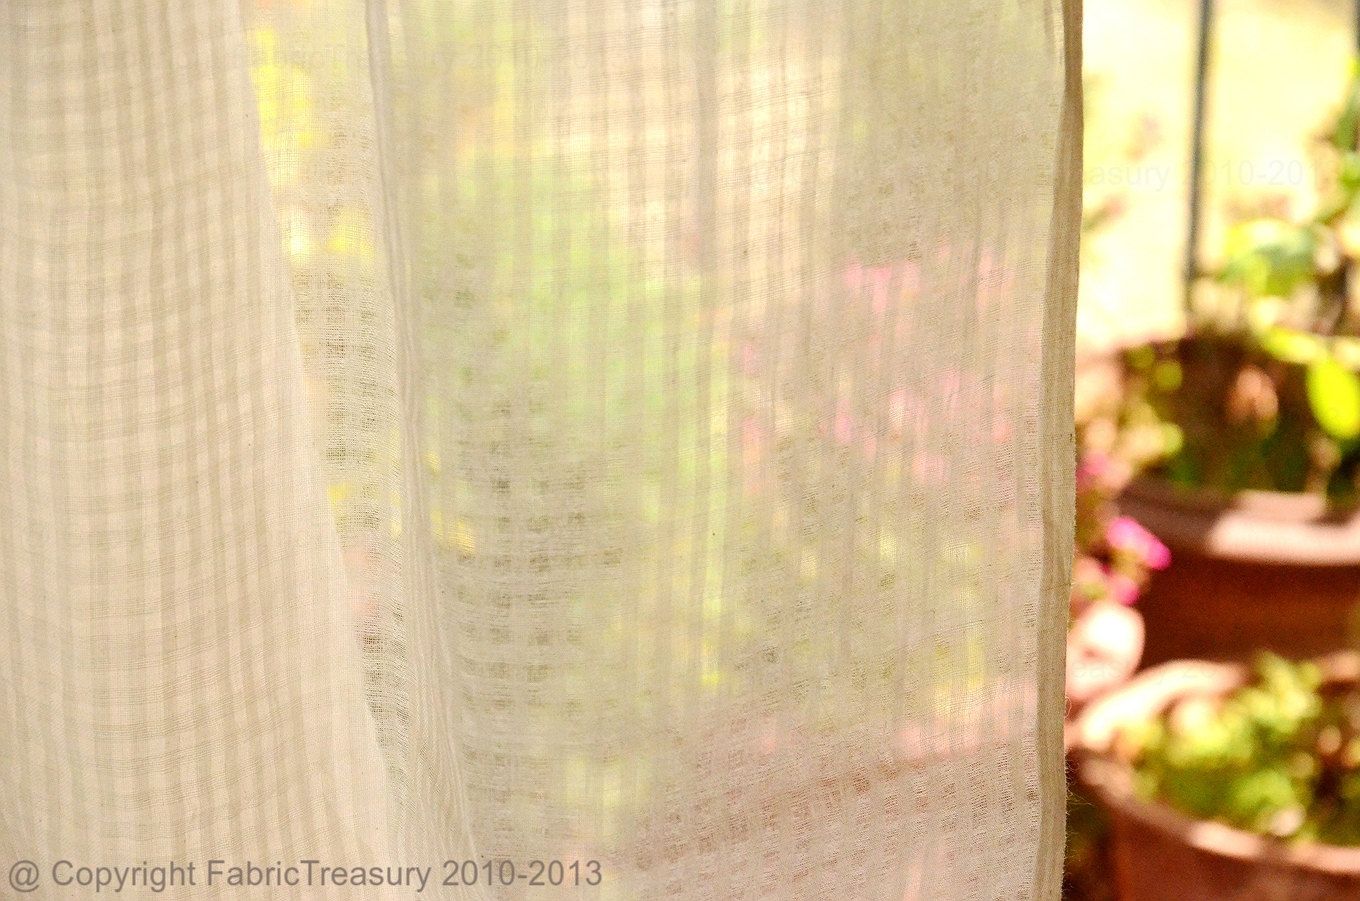 Sheer Curtain Fabric Cotton Fabric For Drapes Organic Cotton For Cotton Fabric For Curtains (View 11 of 15)